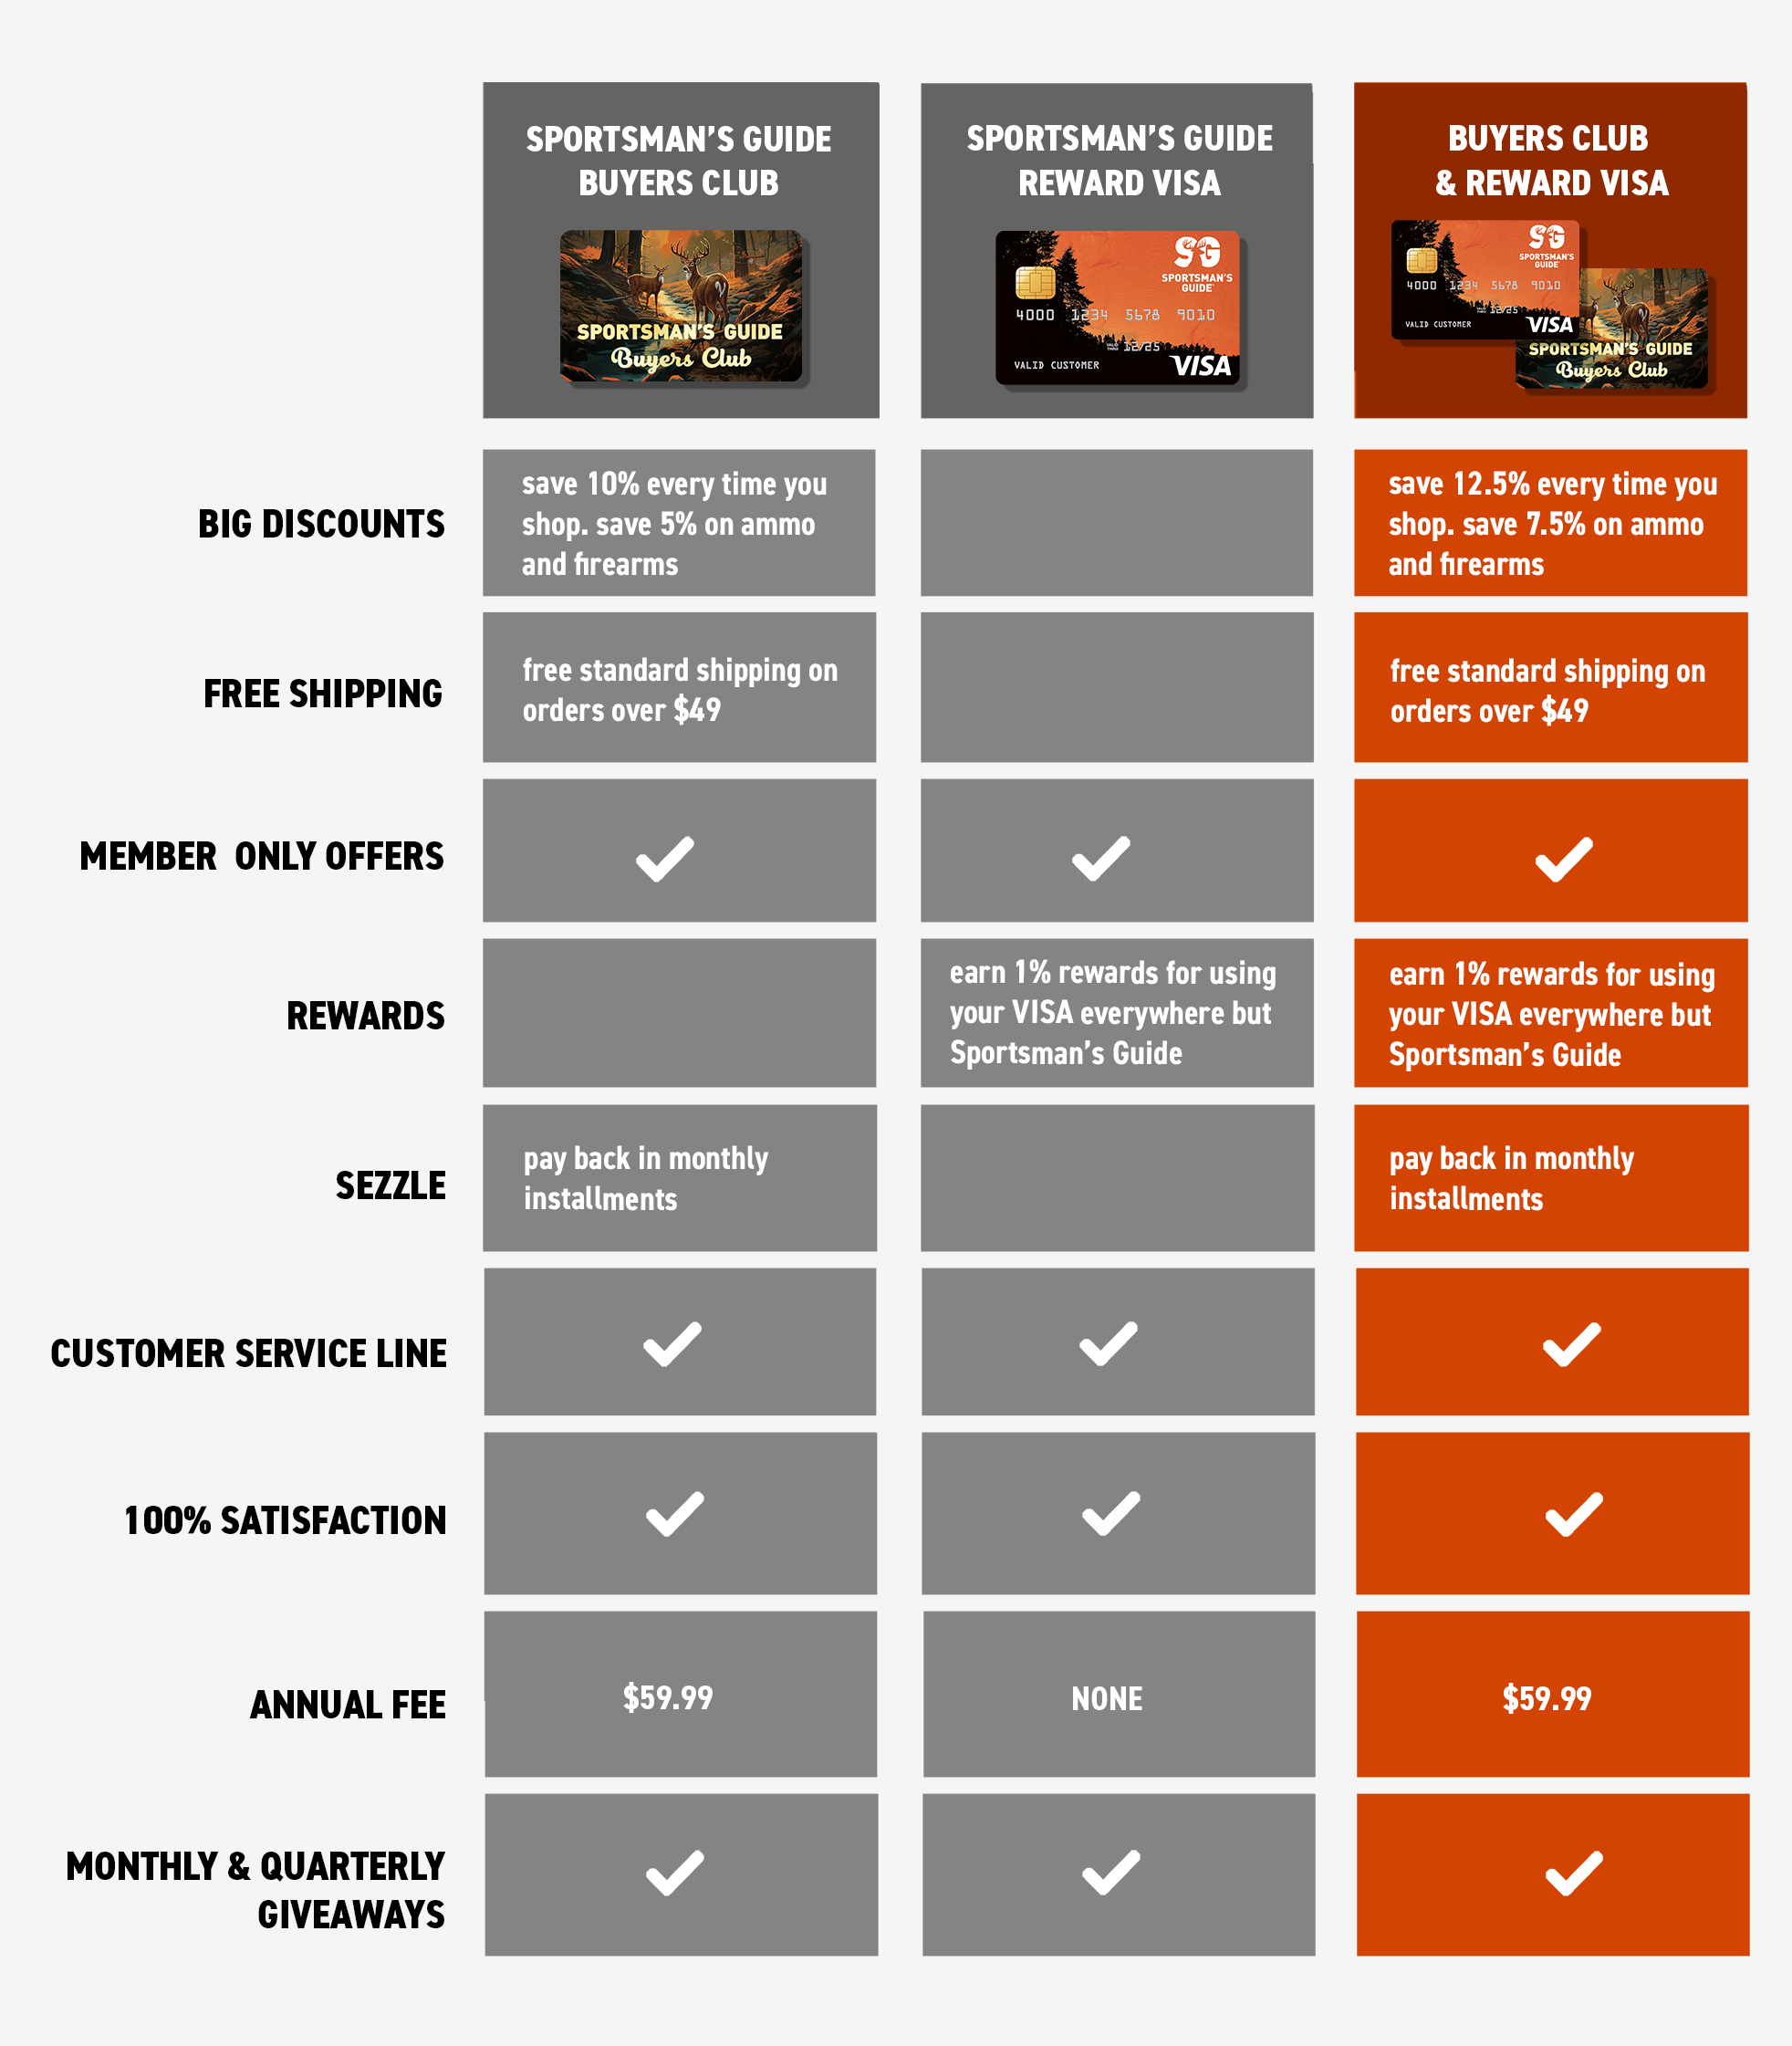 Sportsman's Guide Buyers Club perks comparison table